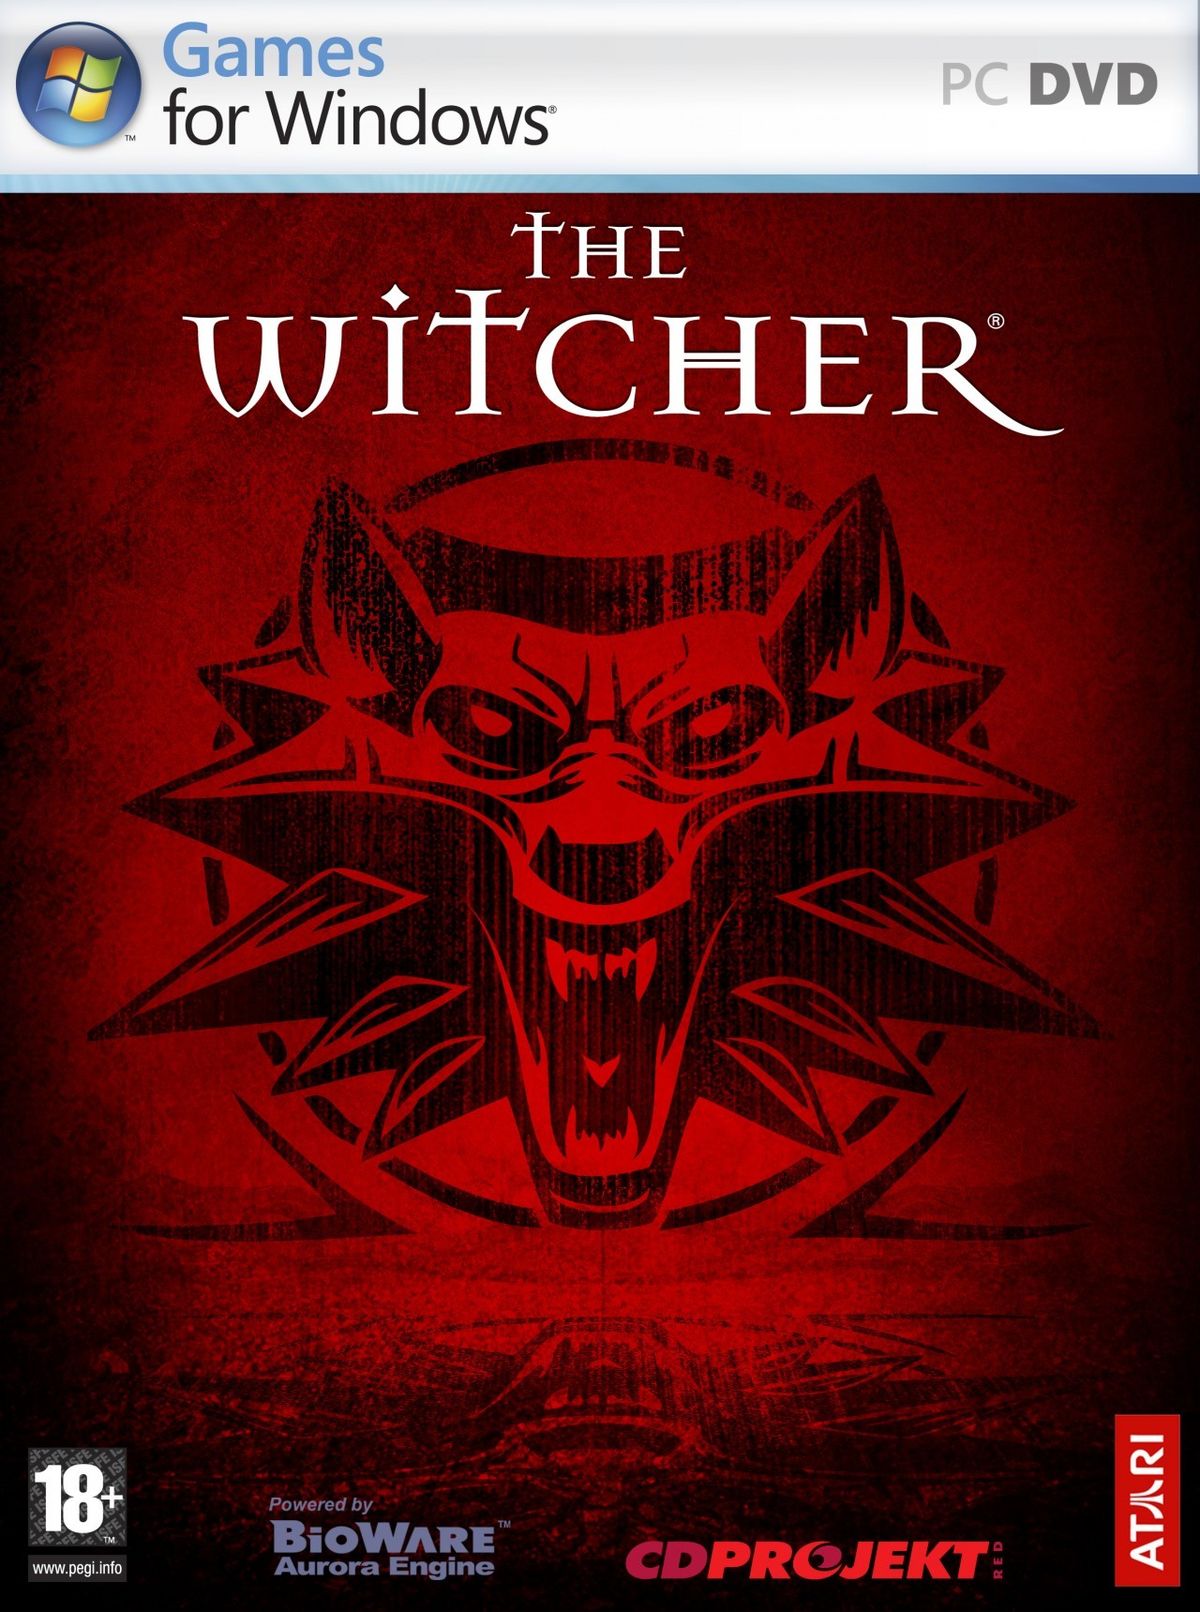 The Witcher 2: Assassins of Kings, Witcher Wiki